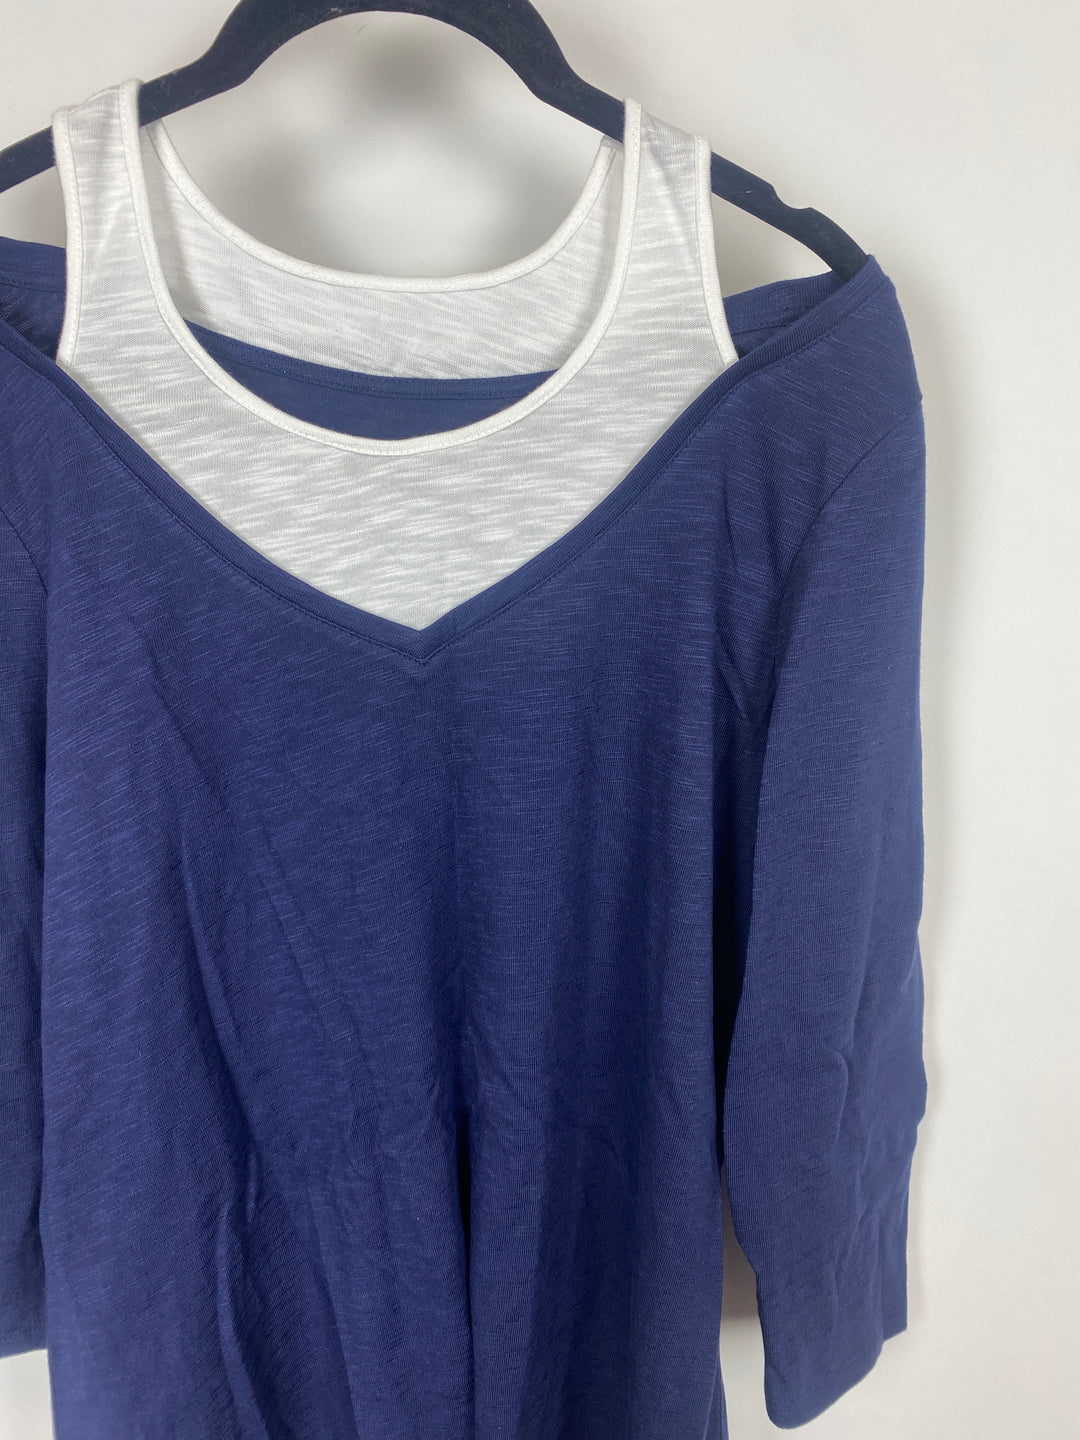 Blue Faux Layered Top - Small/Medium